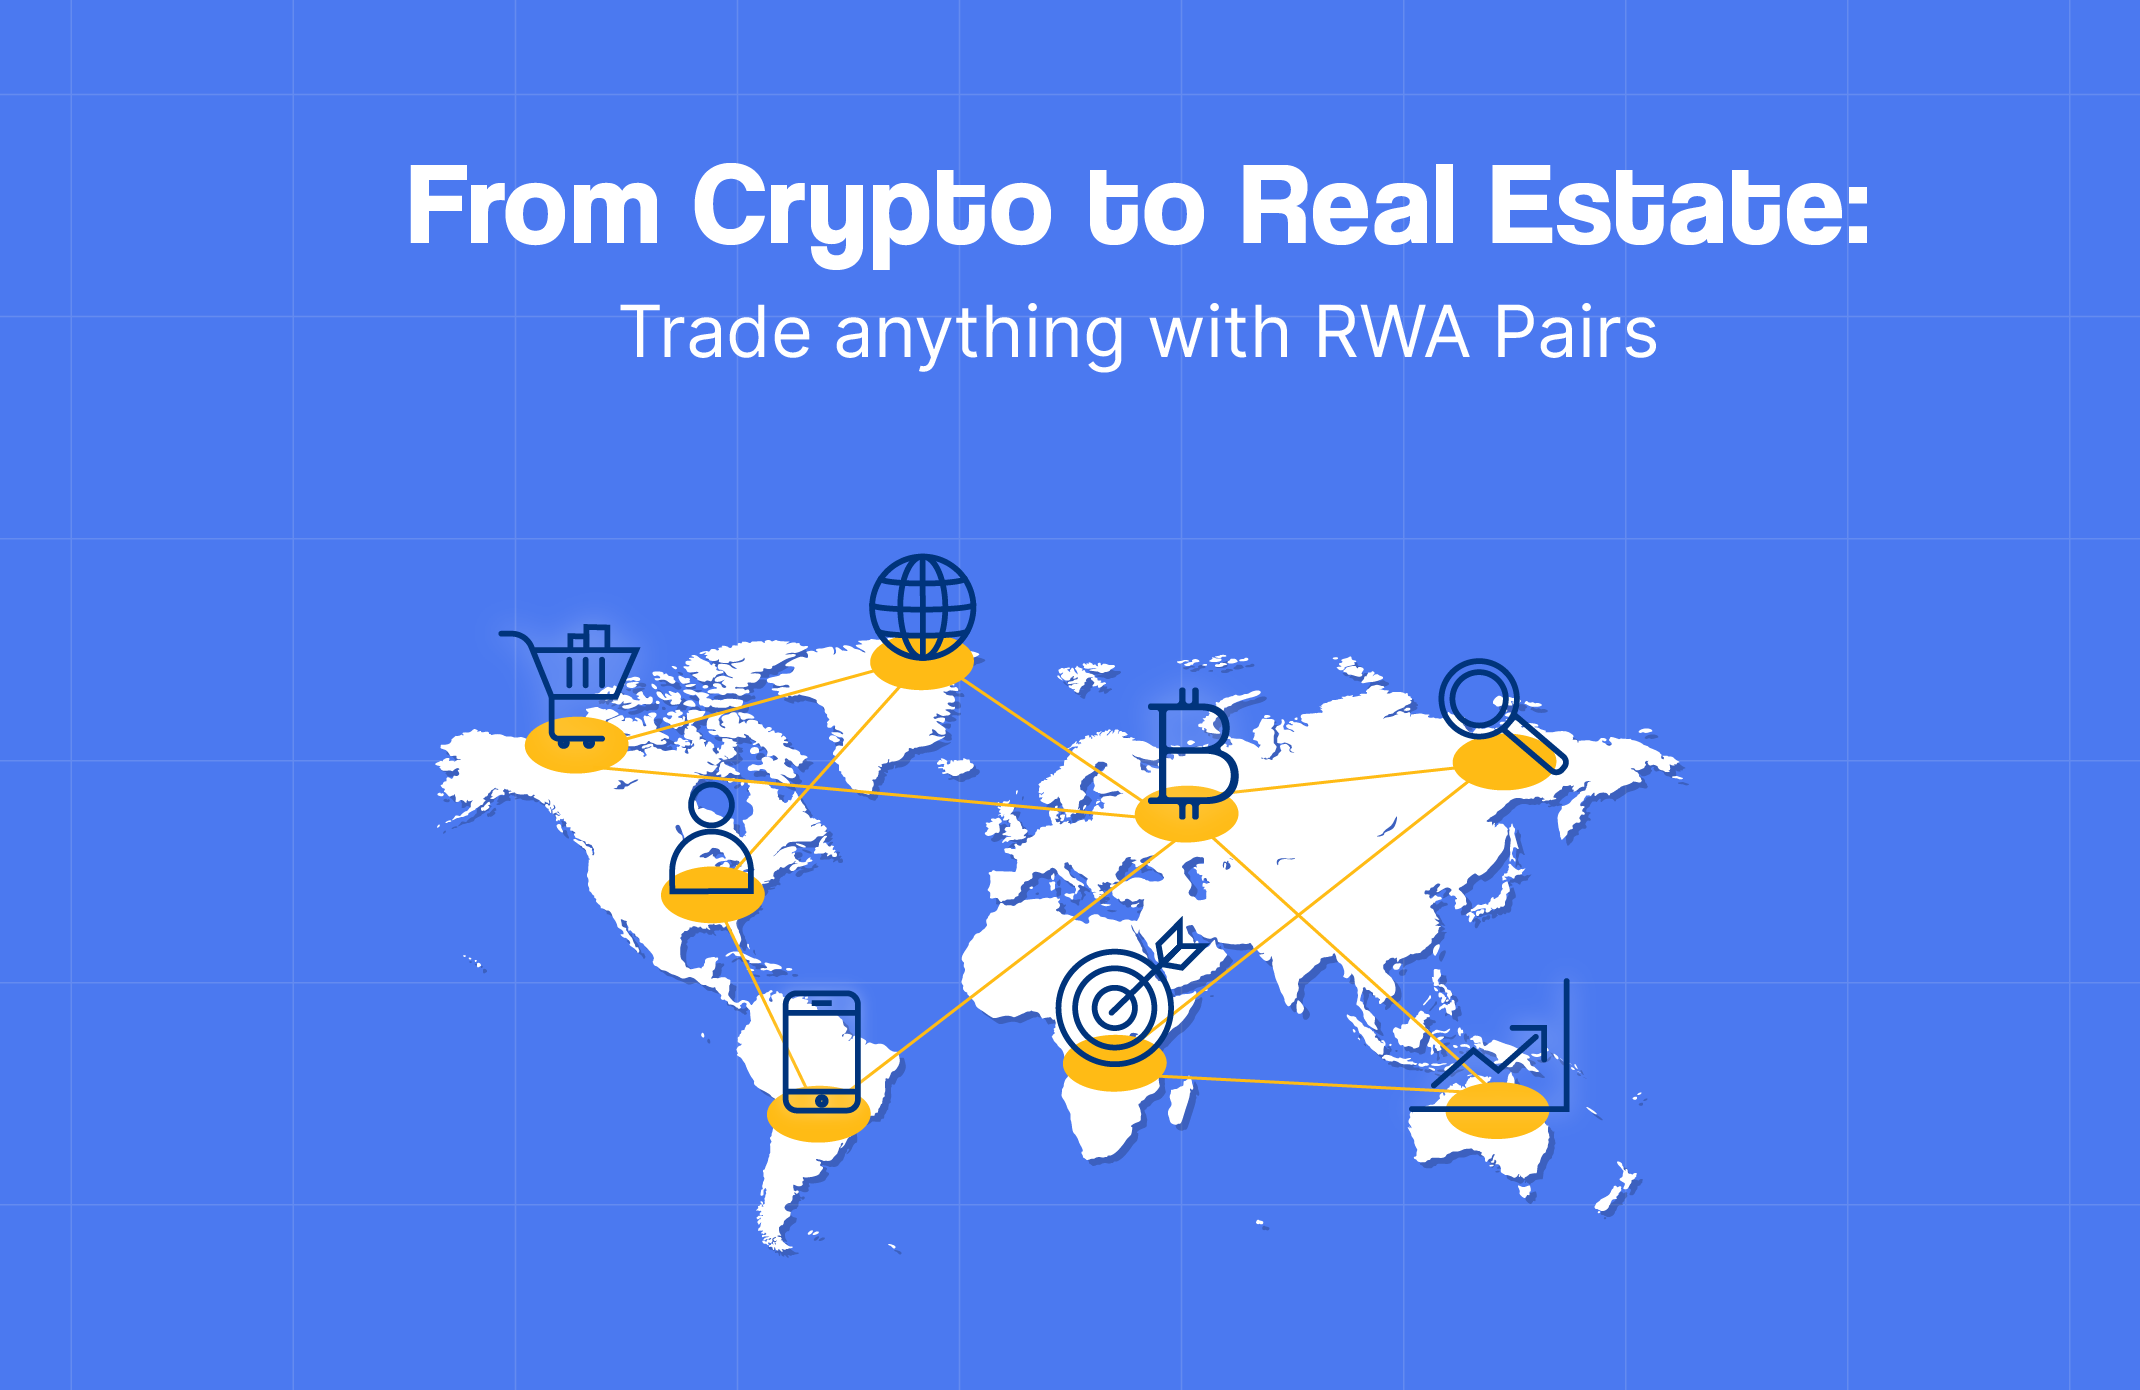 From Crypto to Real Estate: Trade anything with RWA Pairs